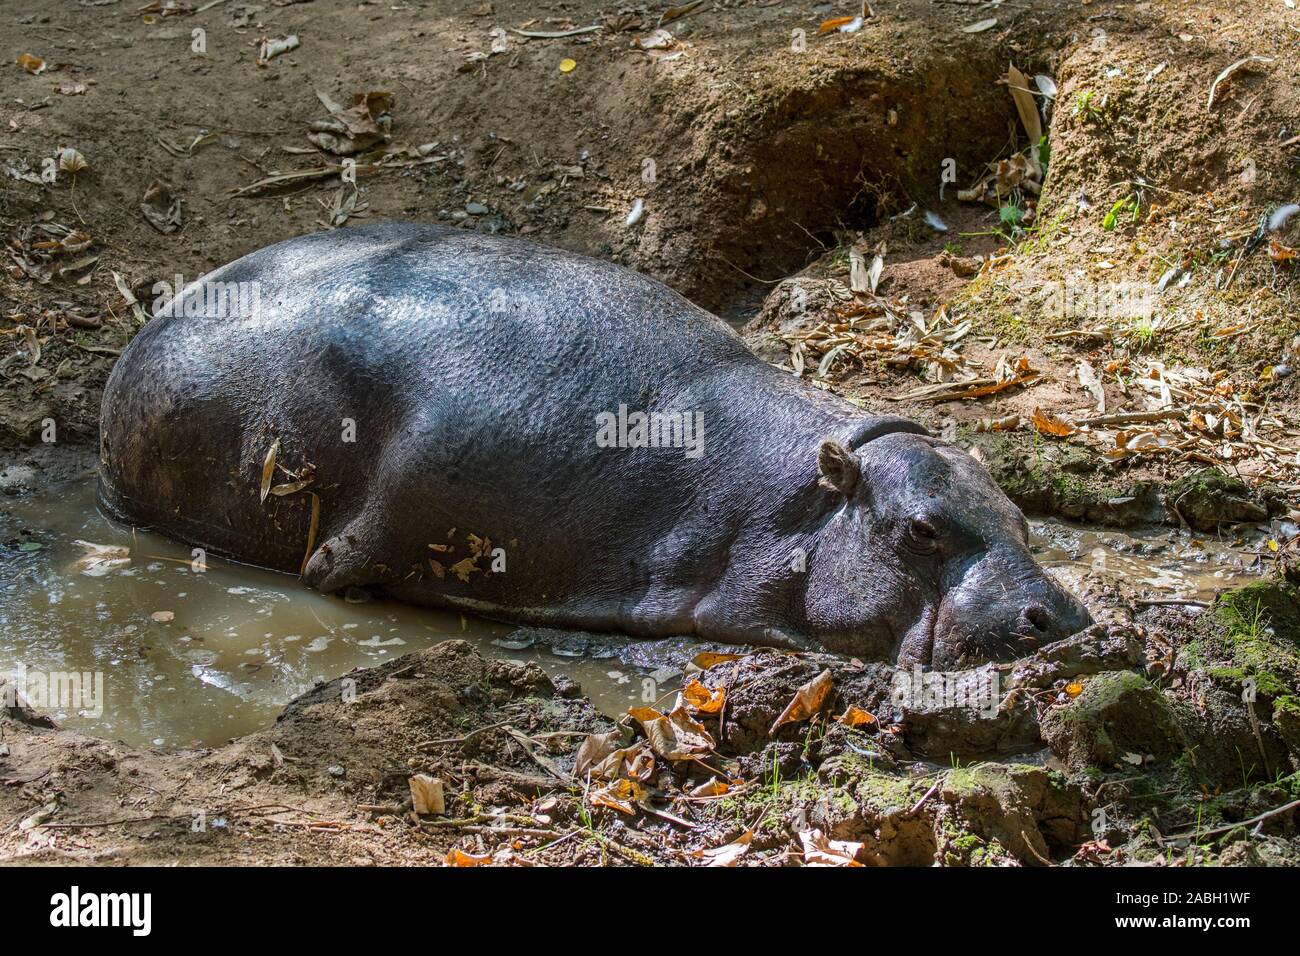 Pygmy hippopotamus (Choeropsis liberiensis / Hexaprotodon liberiensis) resting in mud hole / quagmire, hippo native to swamps of West Africa Stock Photo